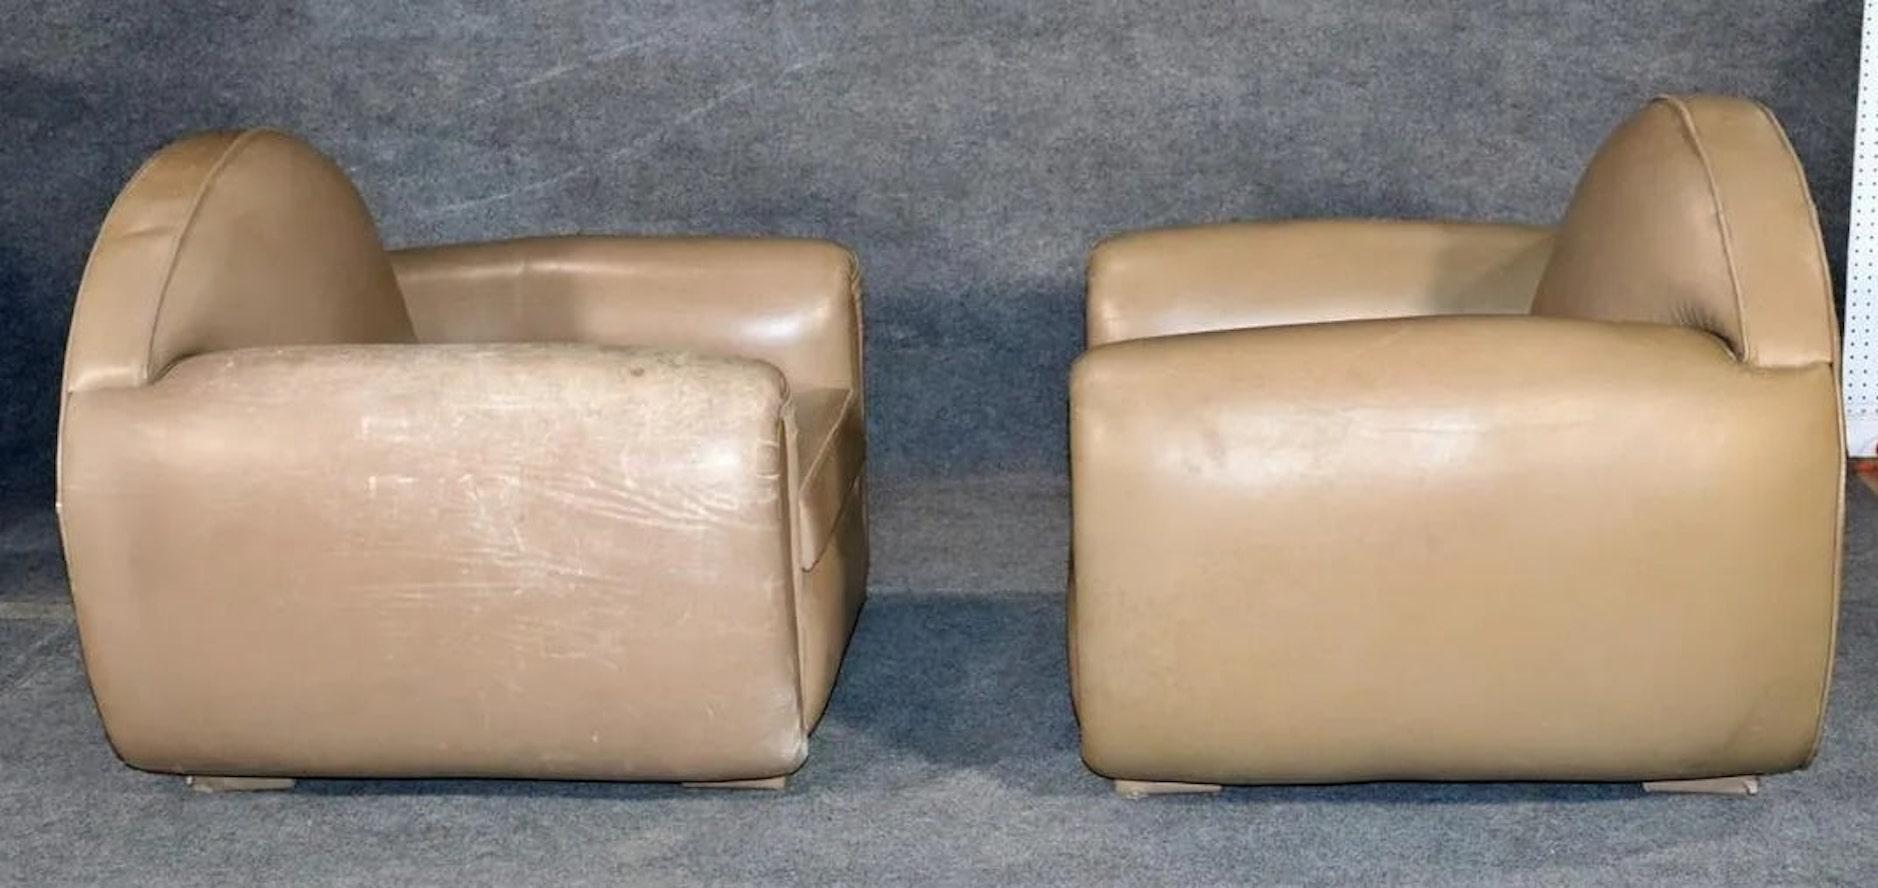 Pair of rounded all leather club chairs. Deco style design with round back, soft leather, attractive age and patina.
Please confirm location NY or NJ.